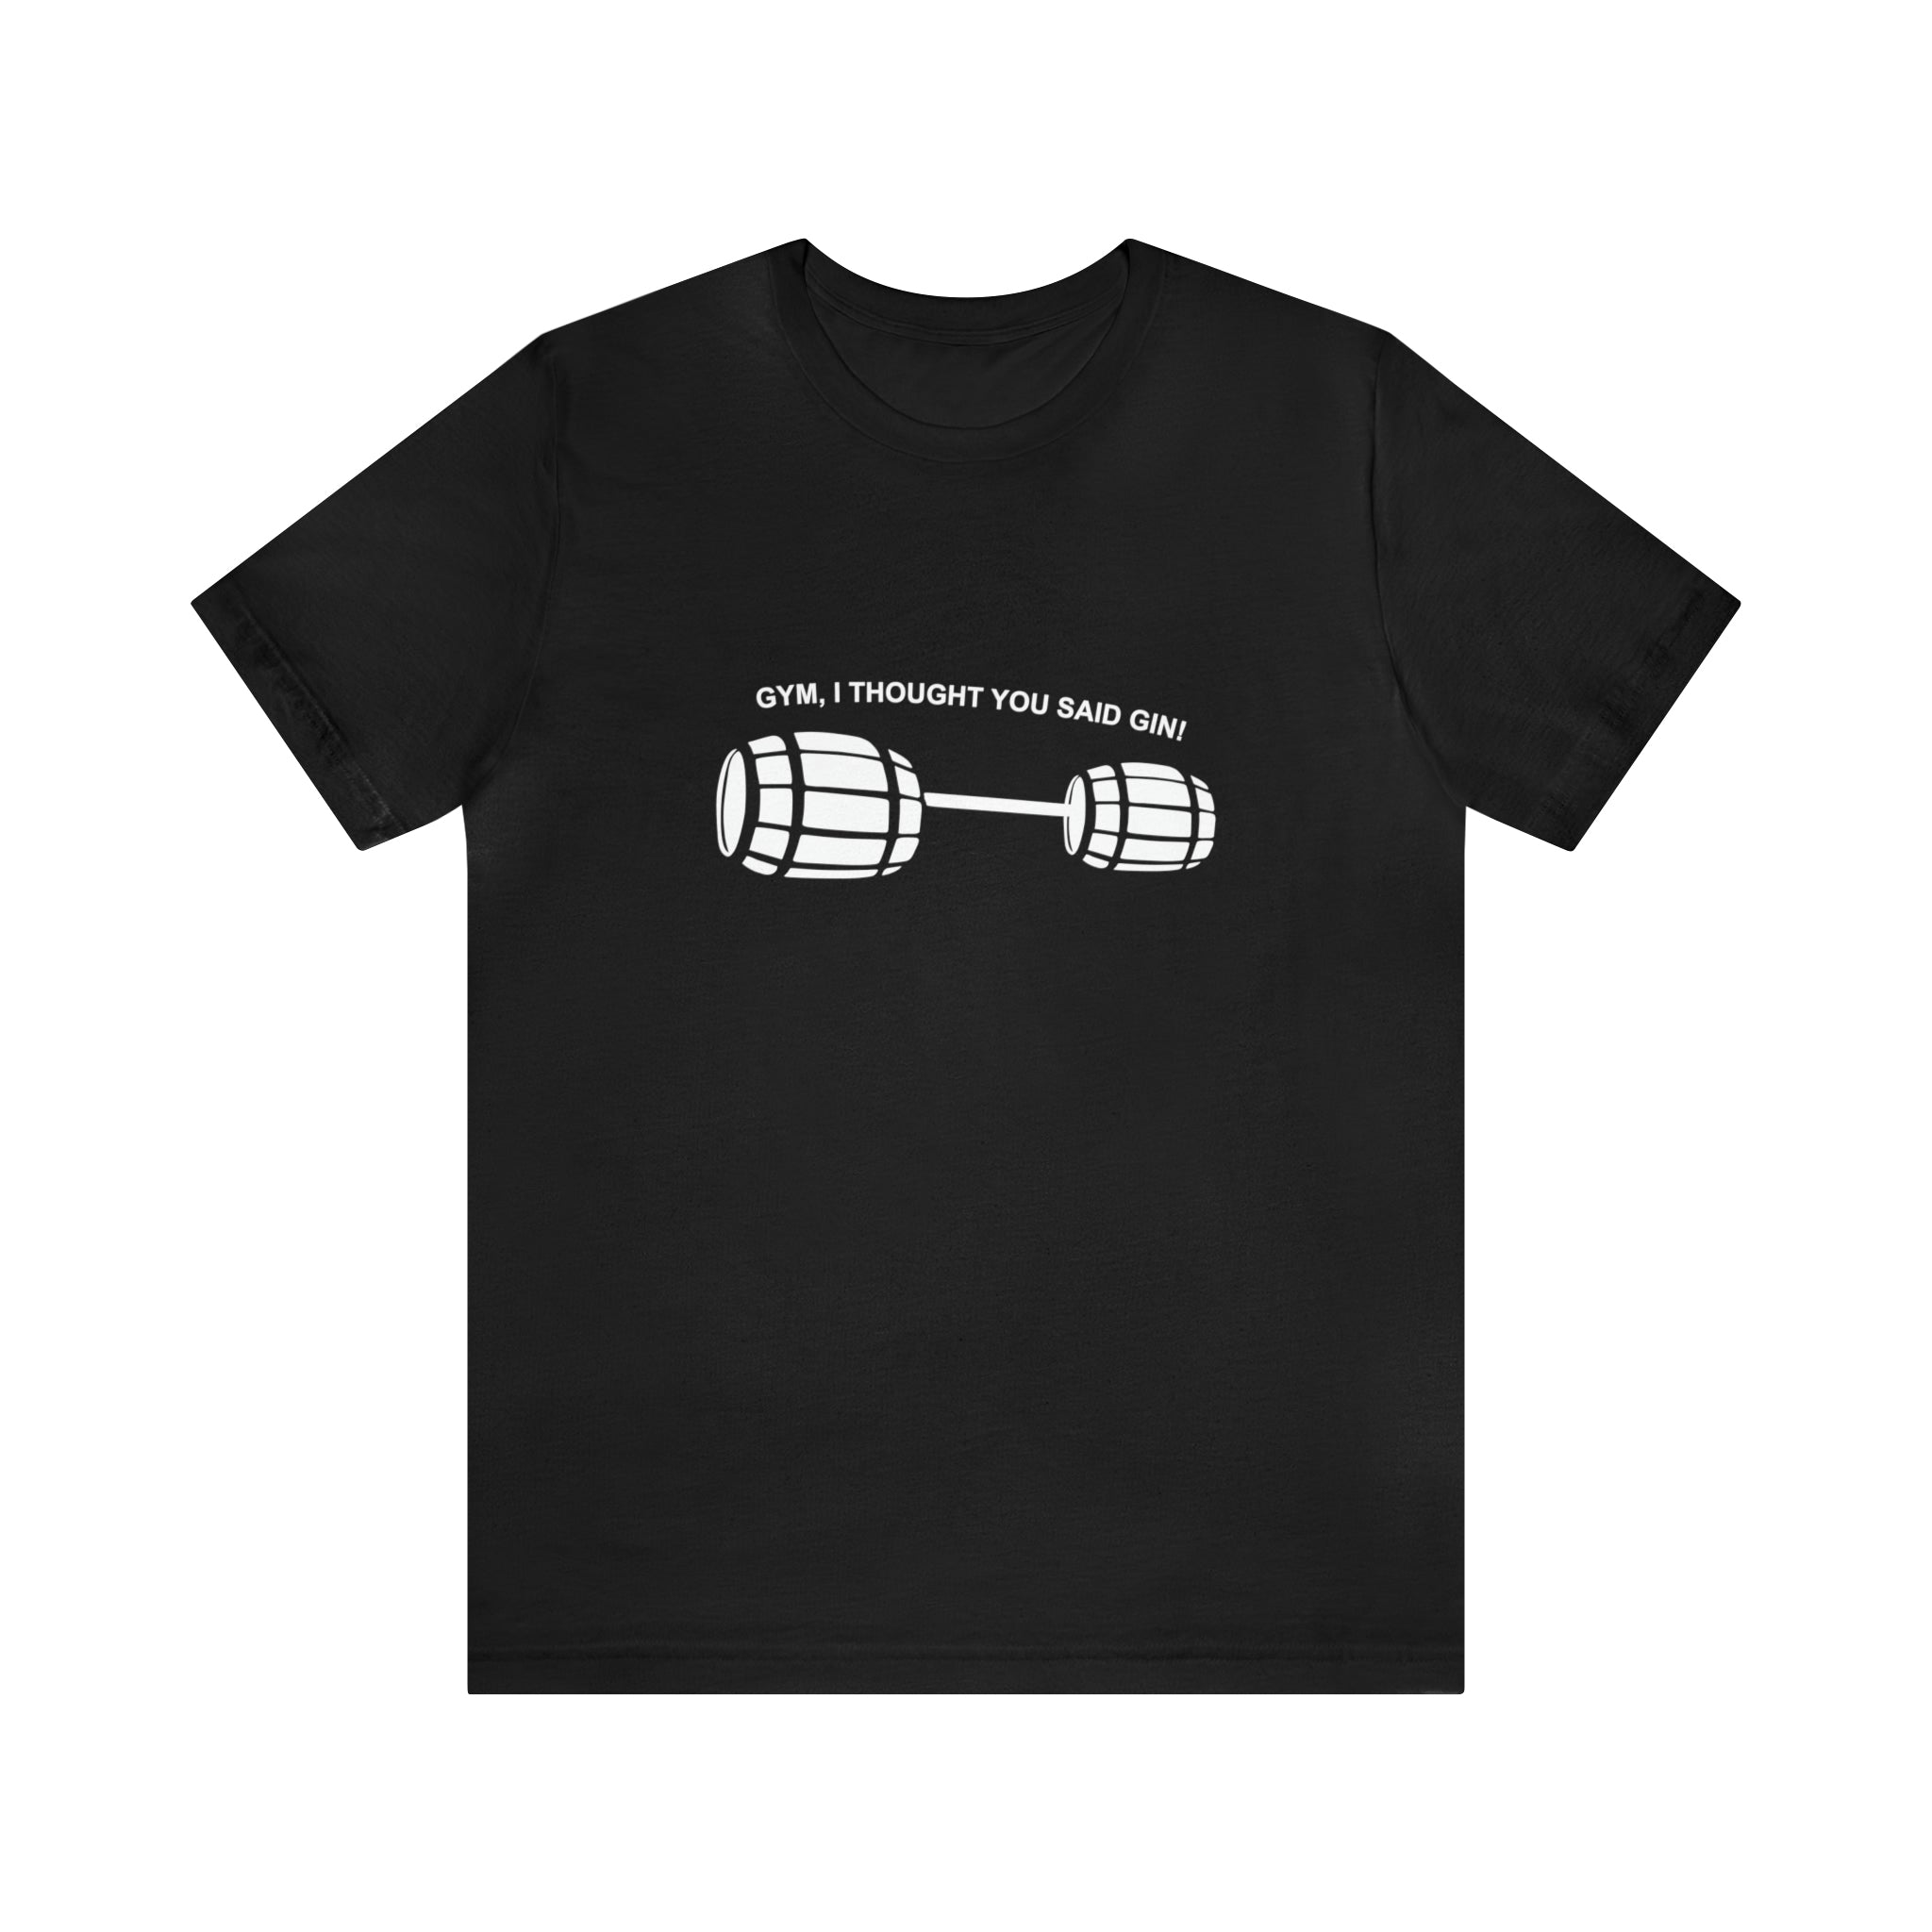 A GYM I Thought You Said GIN T-shirt with white text.